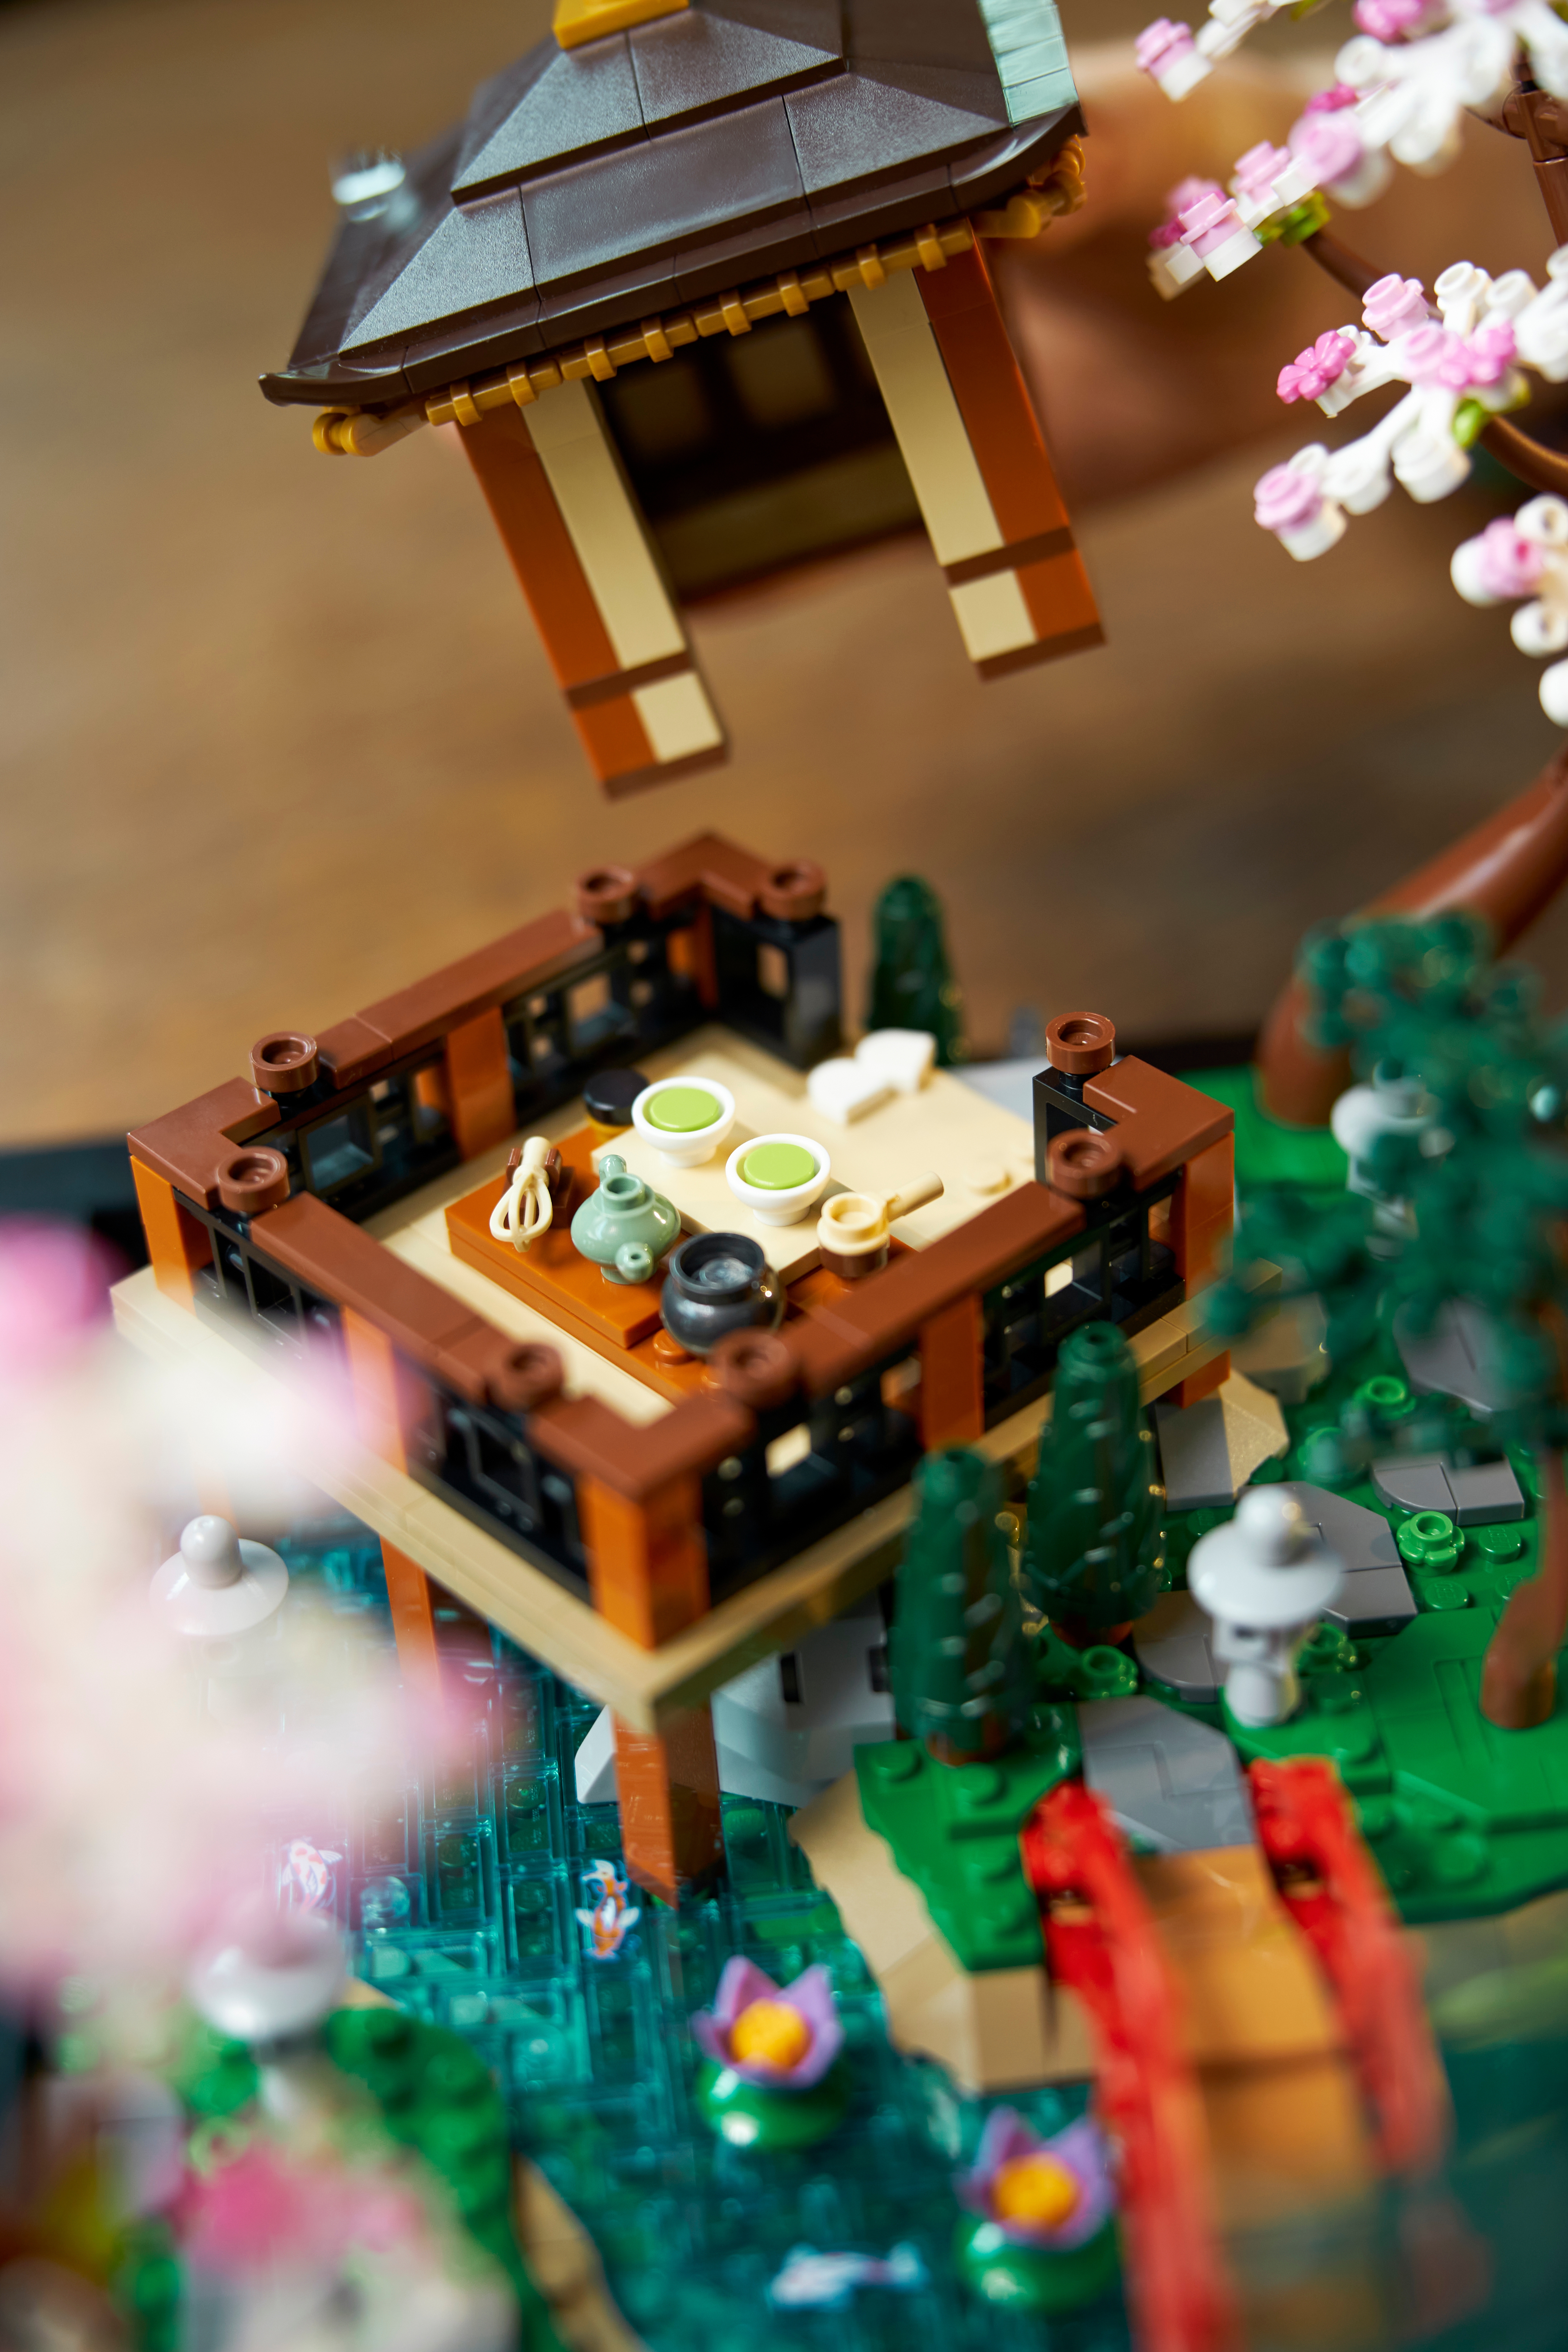 I have this little desk with the bonsai tree and tranquil garden, what  other sets will fit here in this style? : r/lego